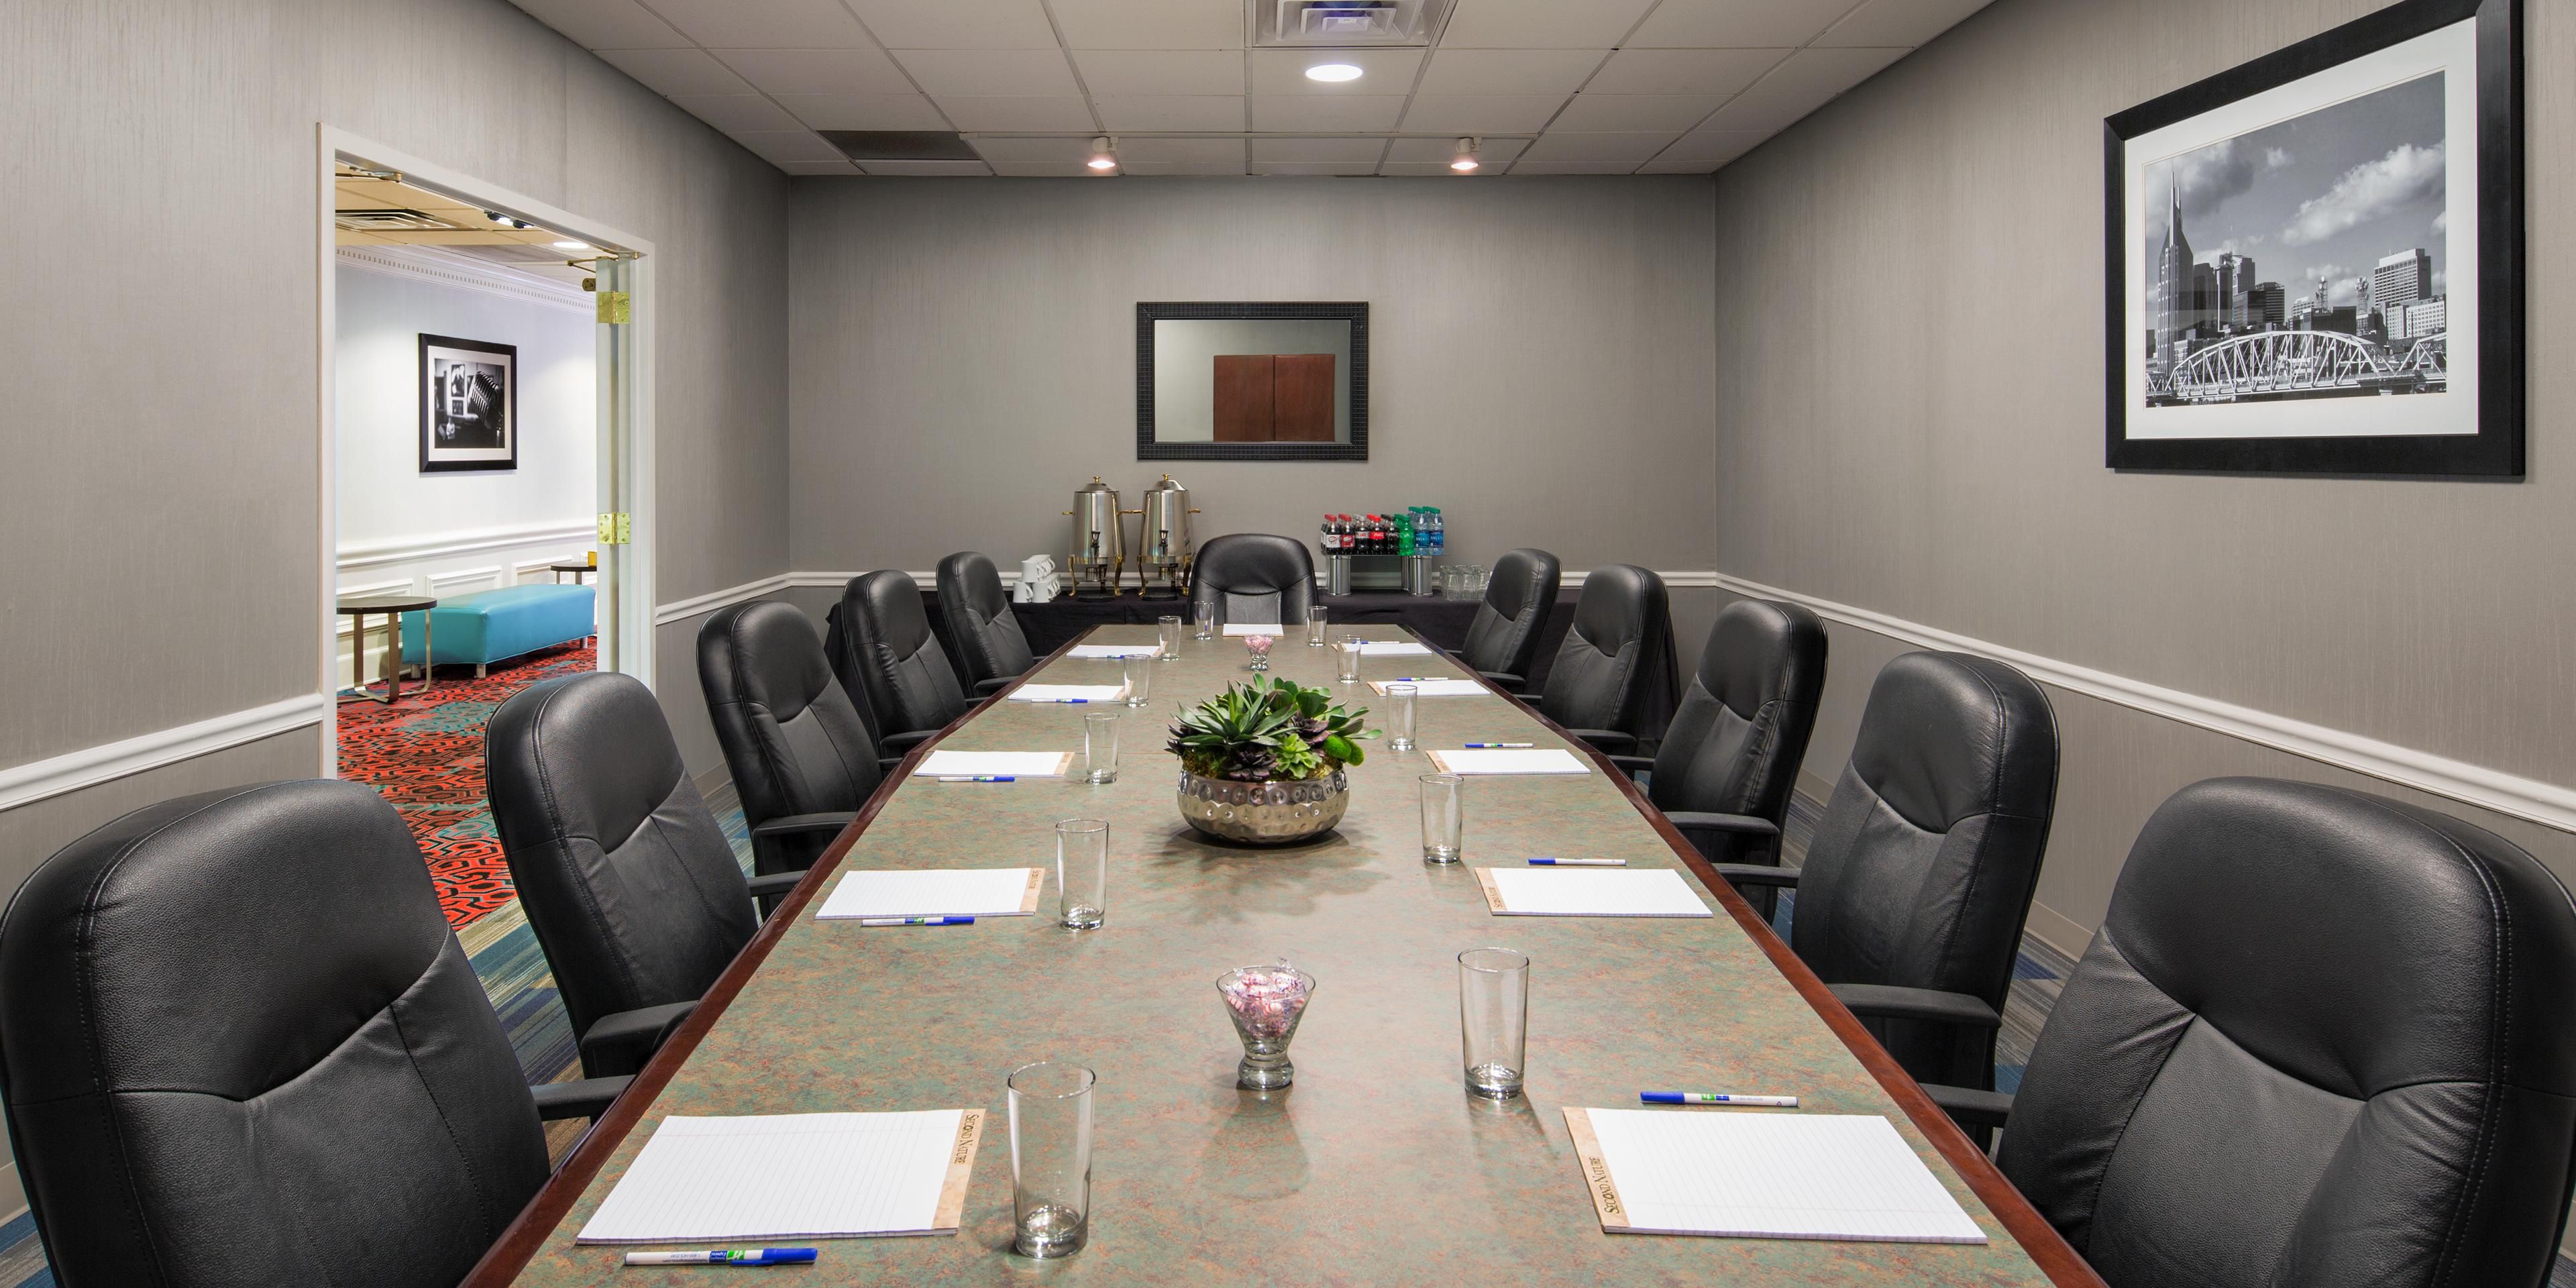 Host a formal business meeting or a unique special occasion in our versatile meeting space. Our hotel offers 500 square feet of space, catering options, and event planning experts. Contact our Sales Office for your next event.